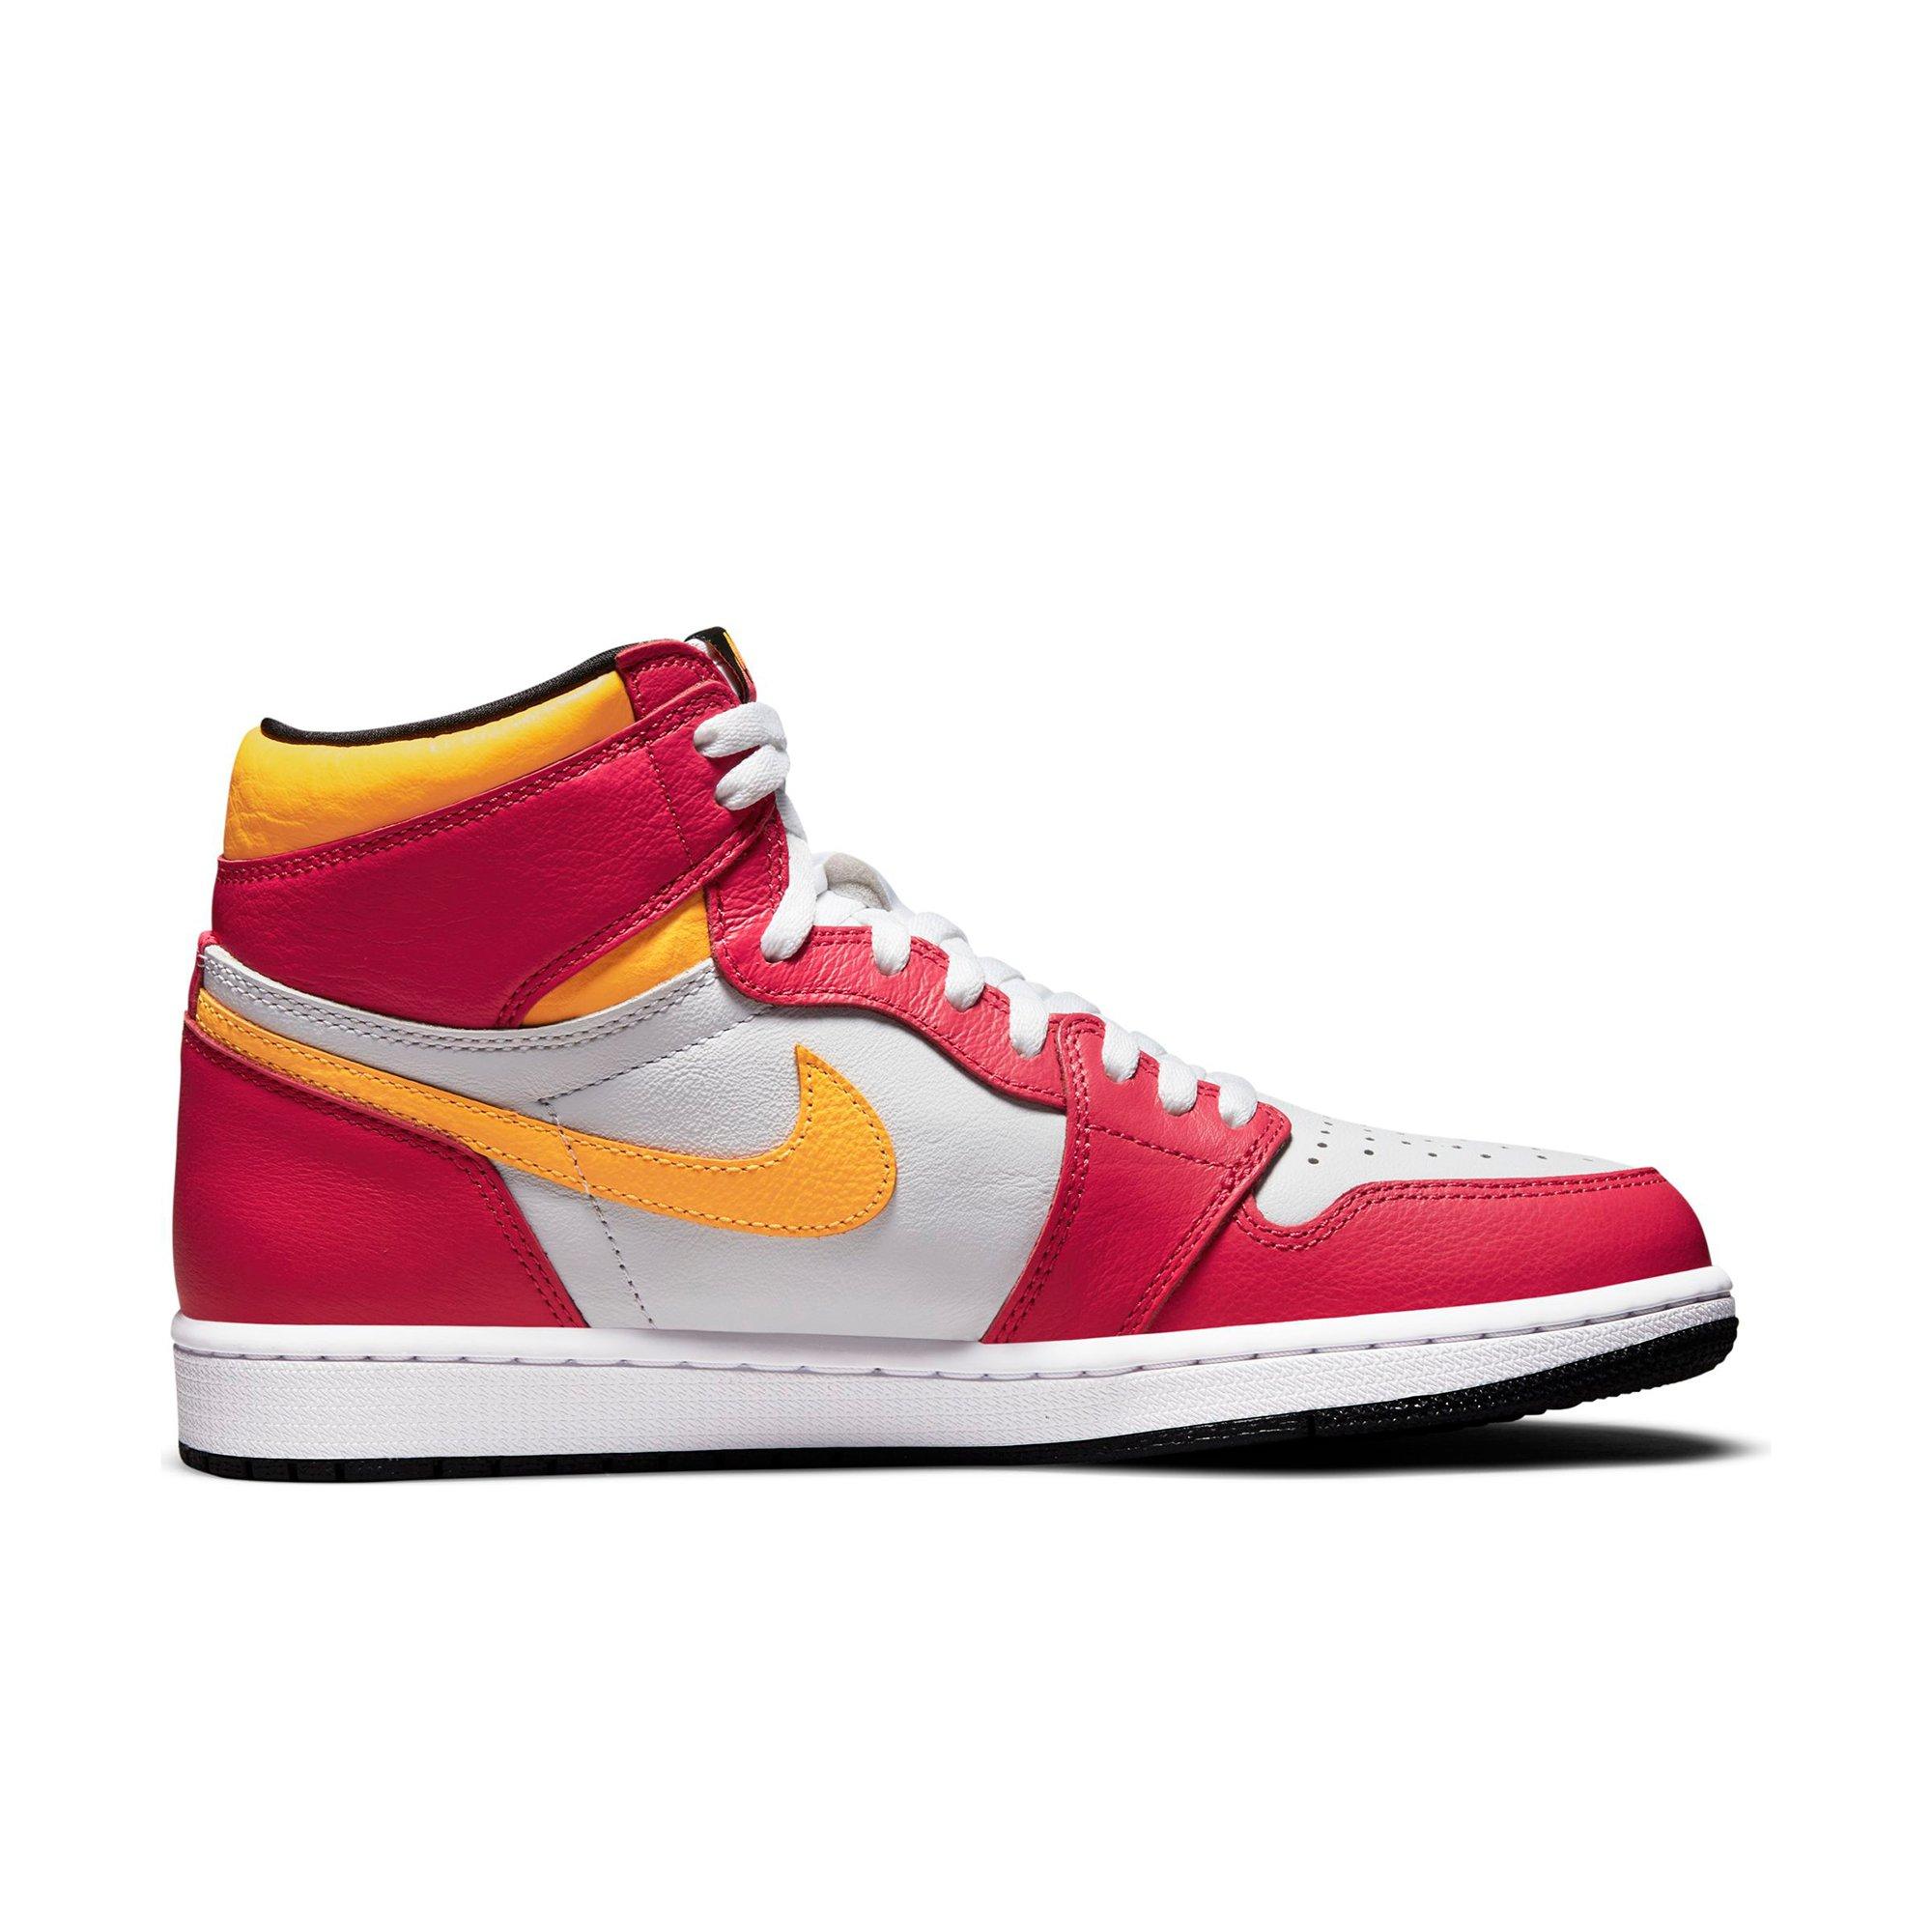 1/6 Scale Sneakers Sports Shoes Trainers Air AJ1 Red White Orange 